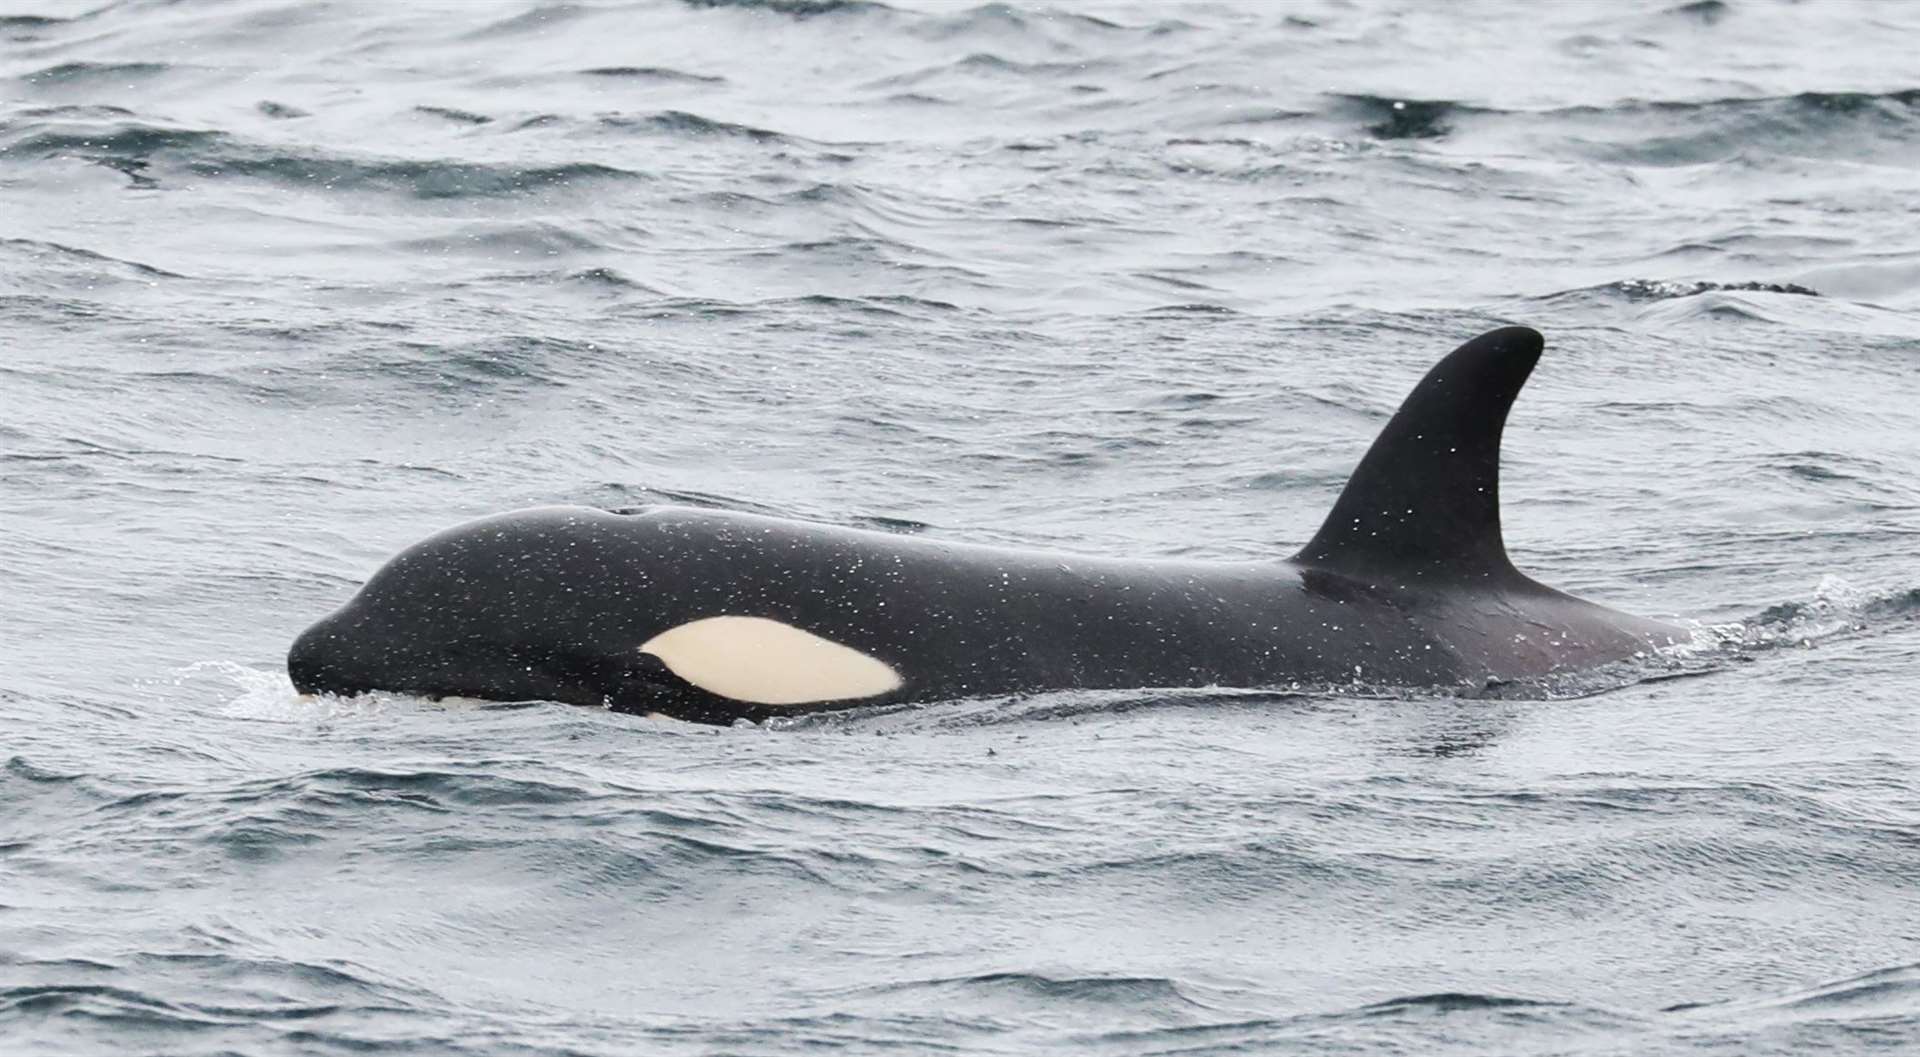 Orca seen from the Pentland Venture on Tuesday. Picture: Steve Truluck